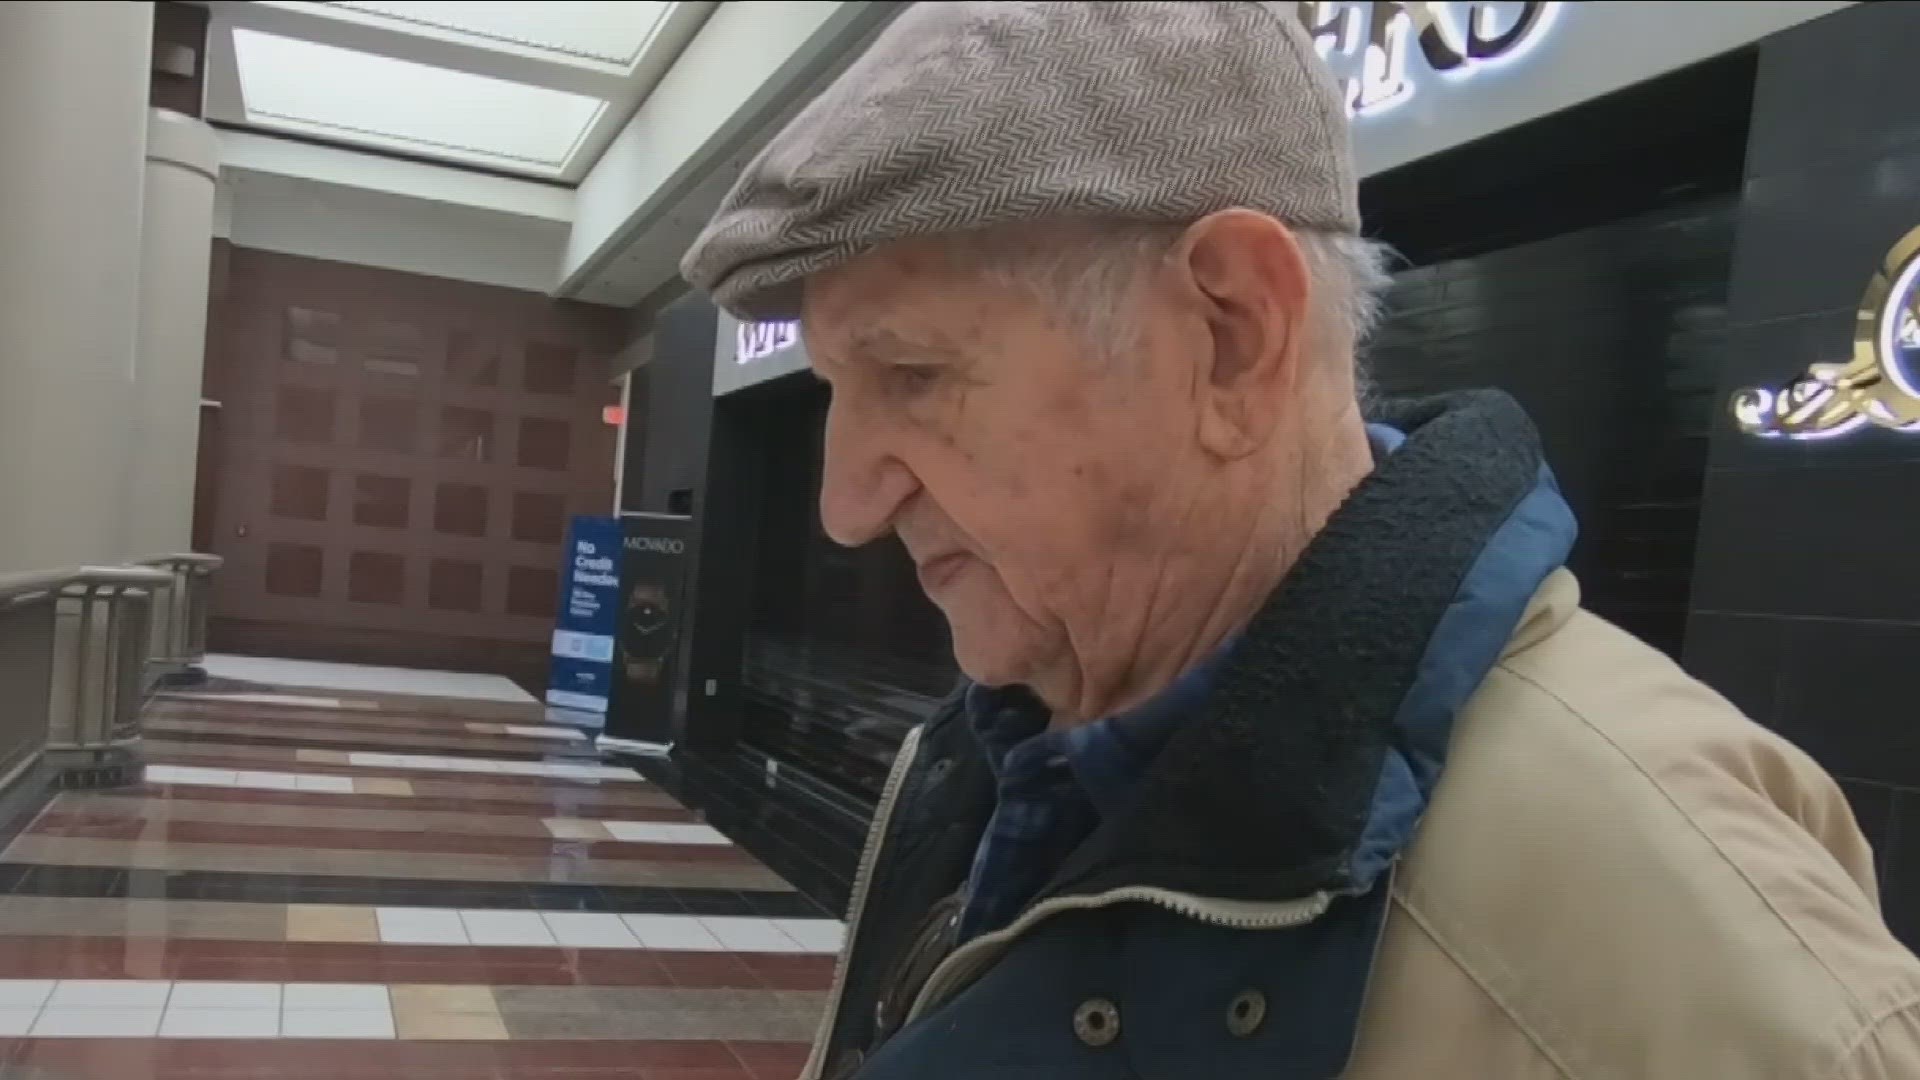 A 99-year-old Cheektowaga man's life journey has taken him from a work camp in World War II, to being the oldest mall-walker at the Walden Galleria.